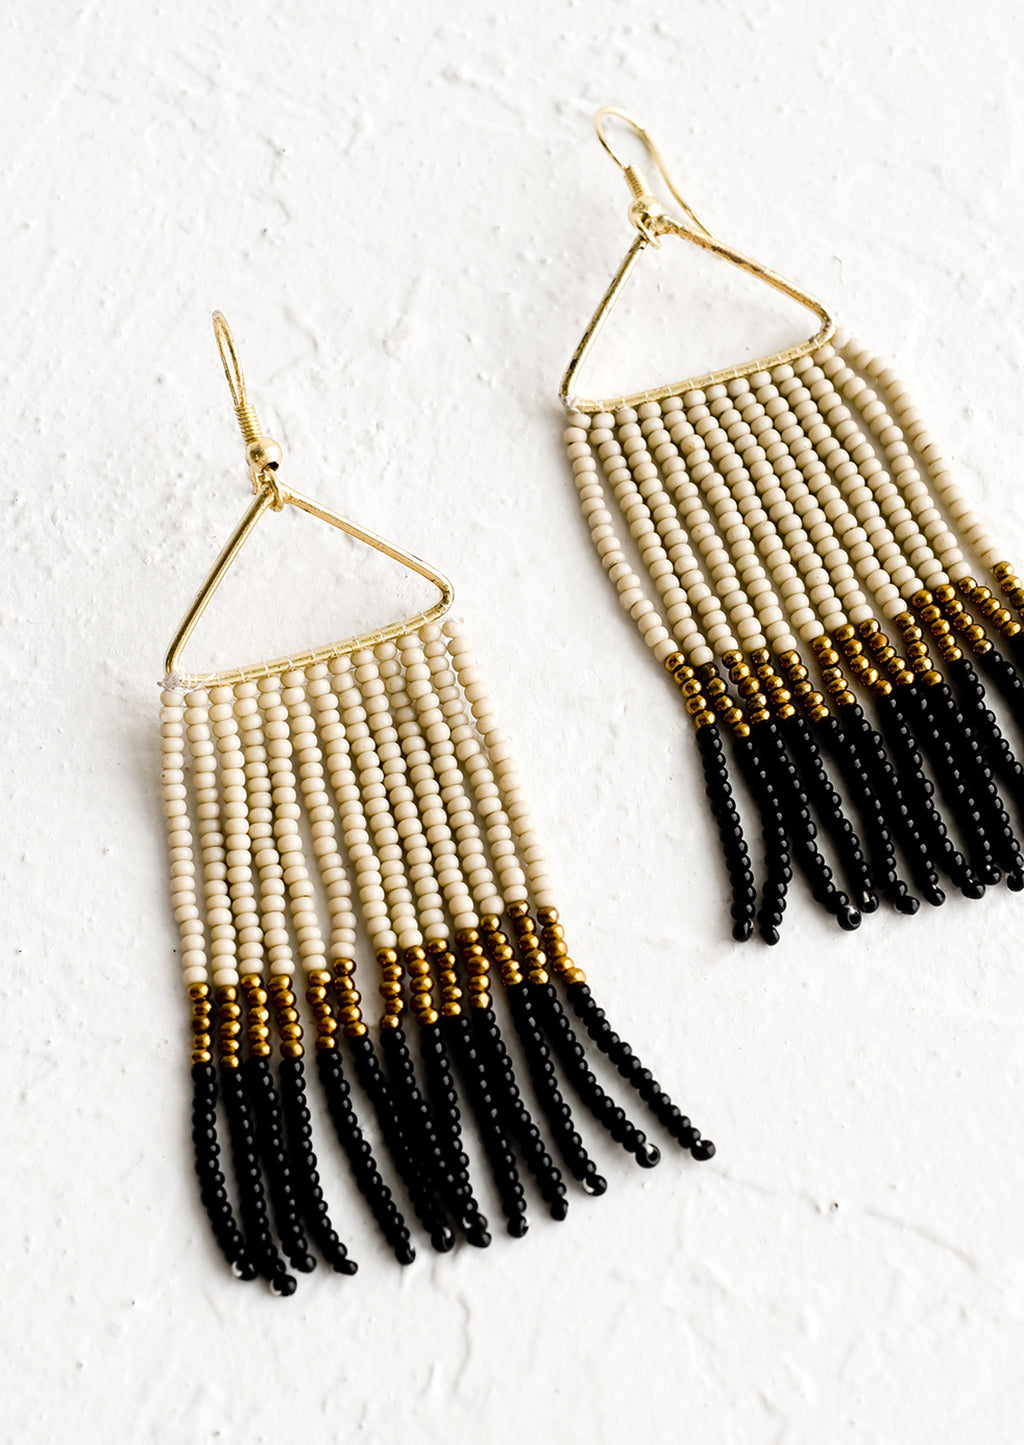 Black / Gold Multi: Beaded earrings with triangular metal frame and fringed beads below in colorblock pattern.